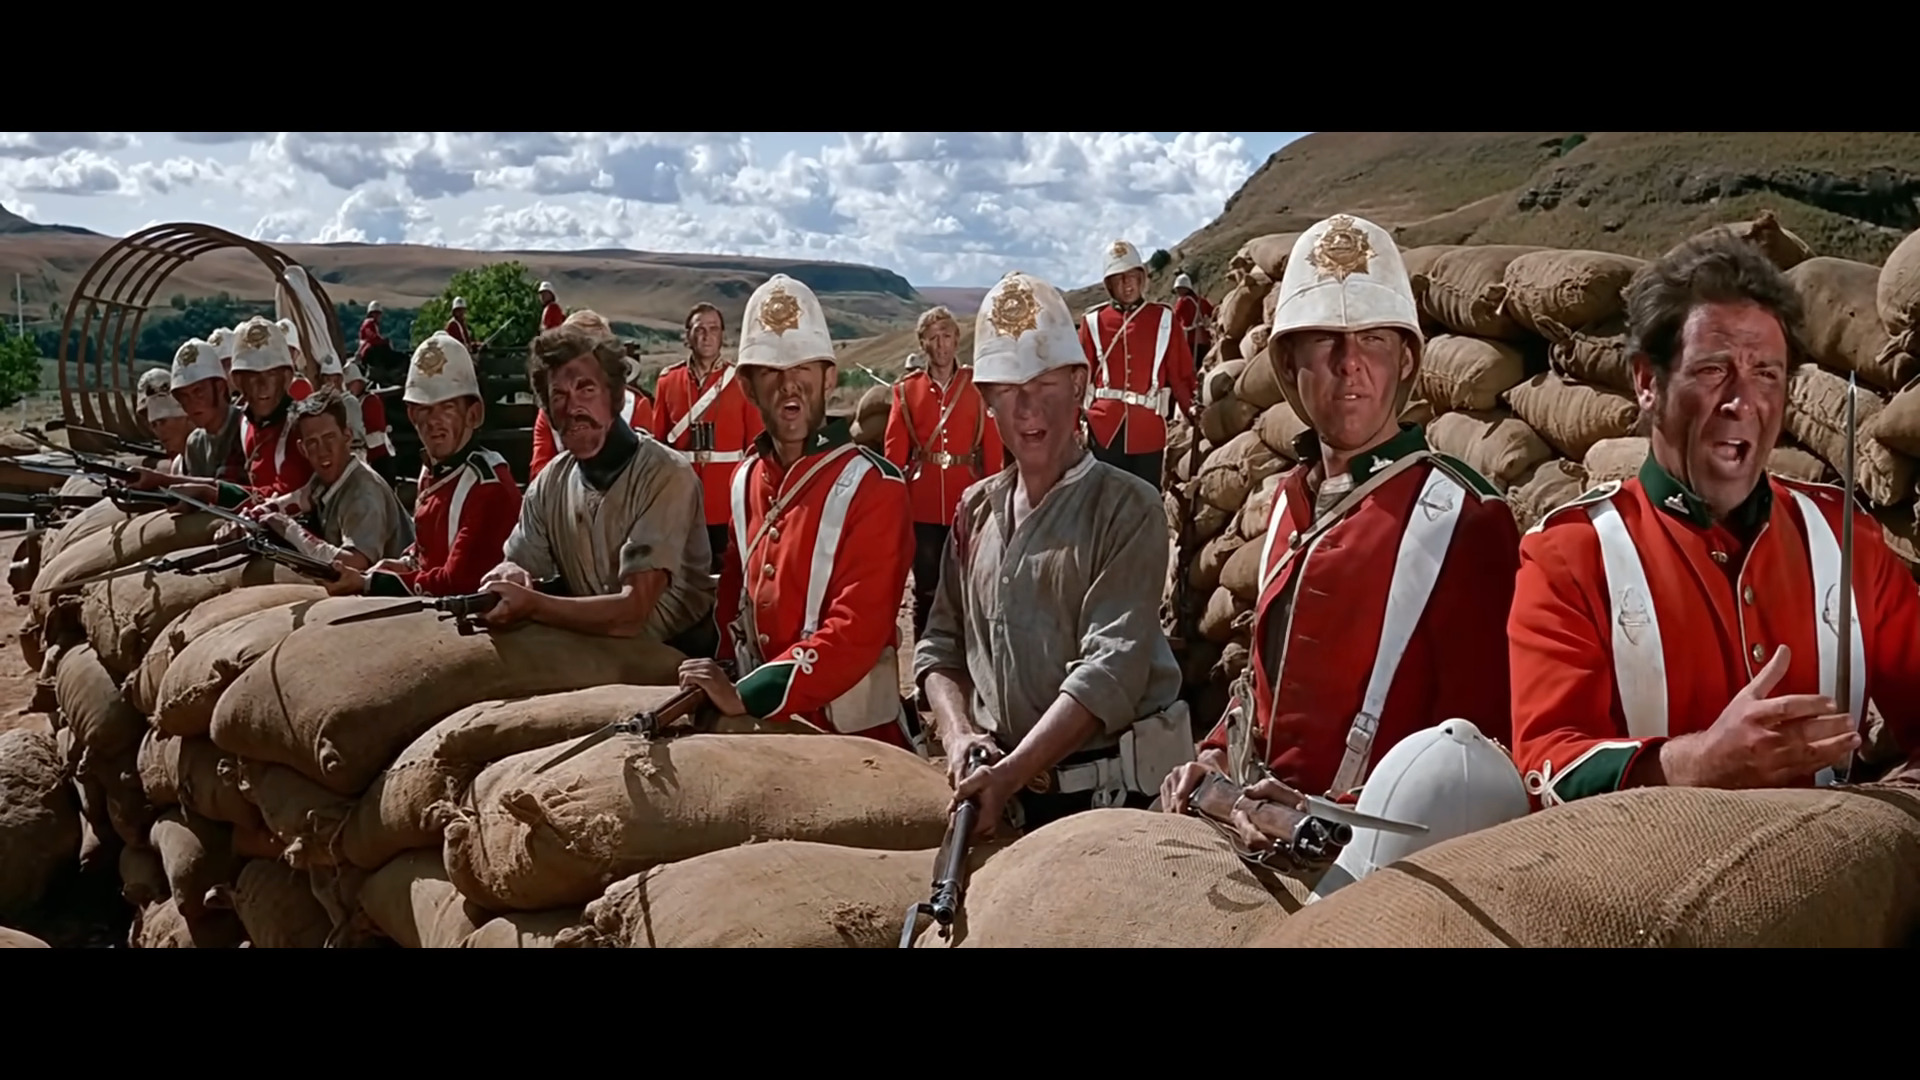 The British Army sing the Welsh song "Men of Harlech" as the Zulu approach for their final showdown in Zulu (1964), Diamond Films